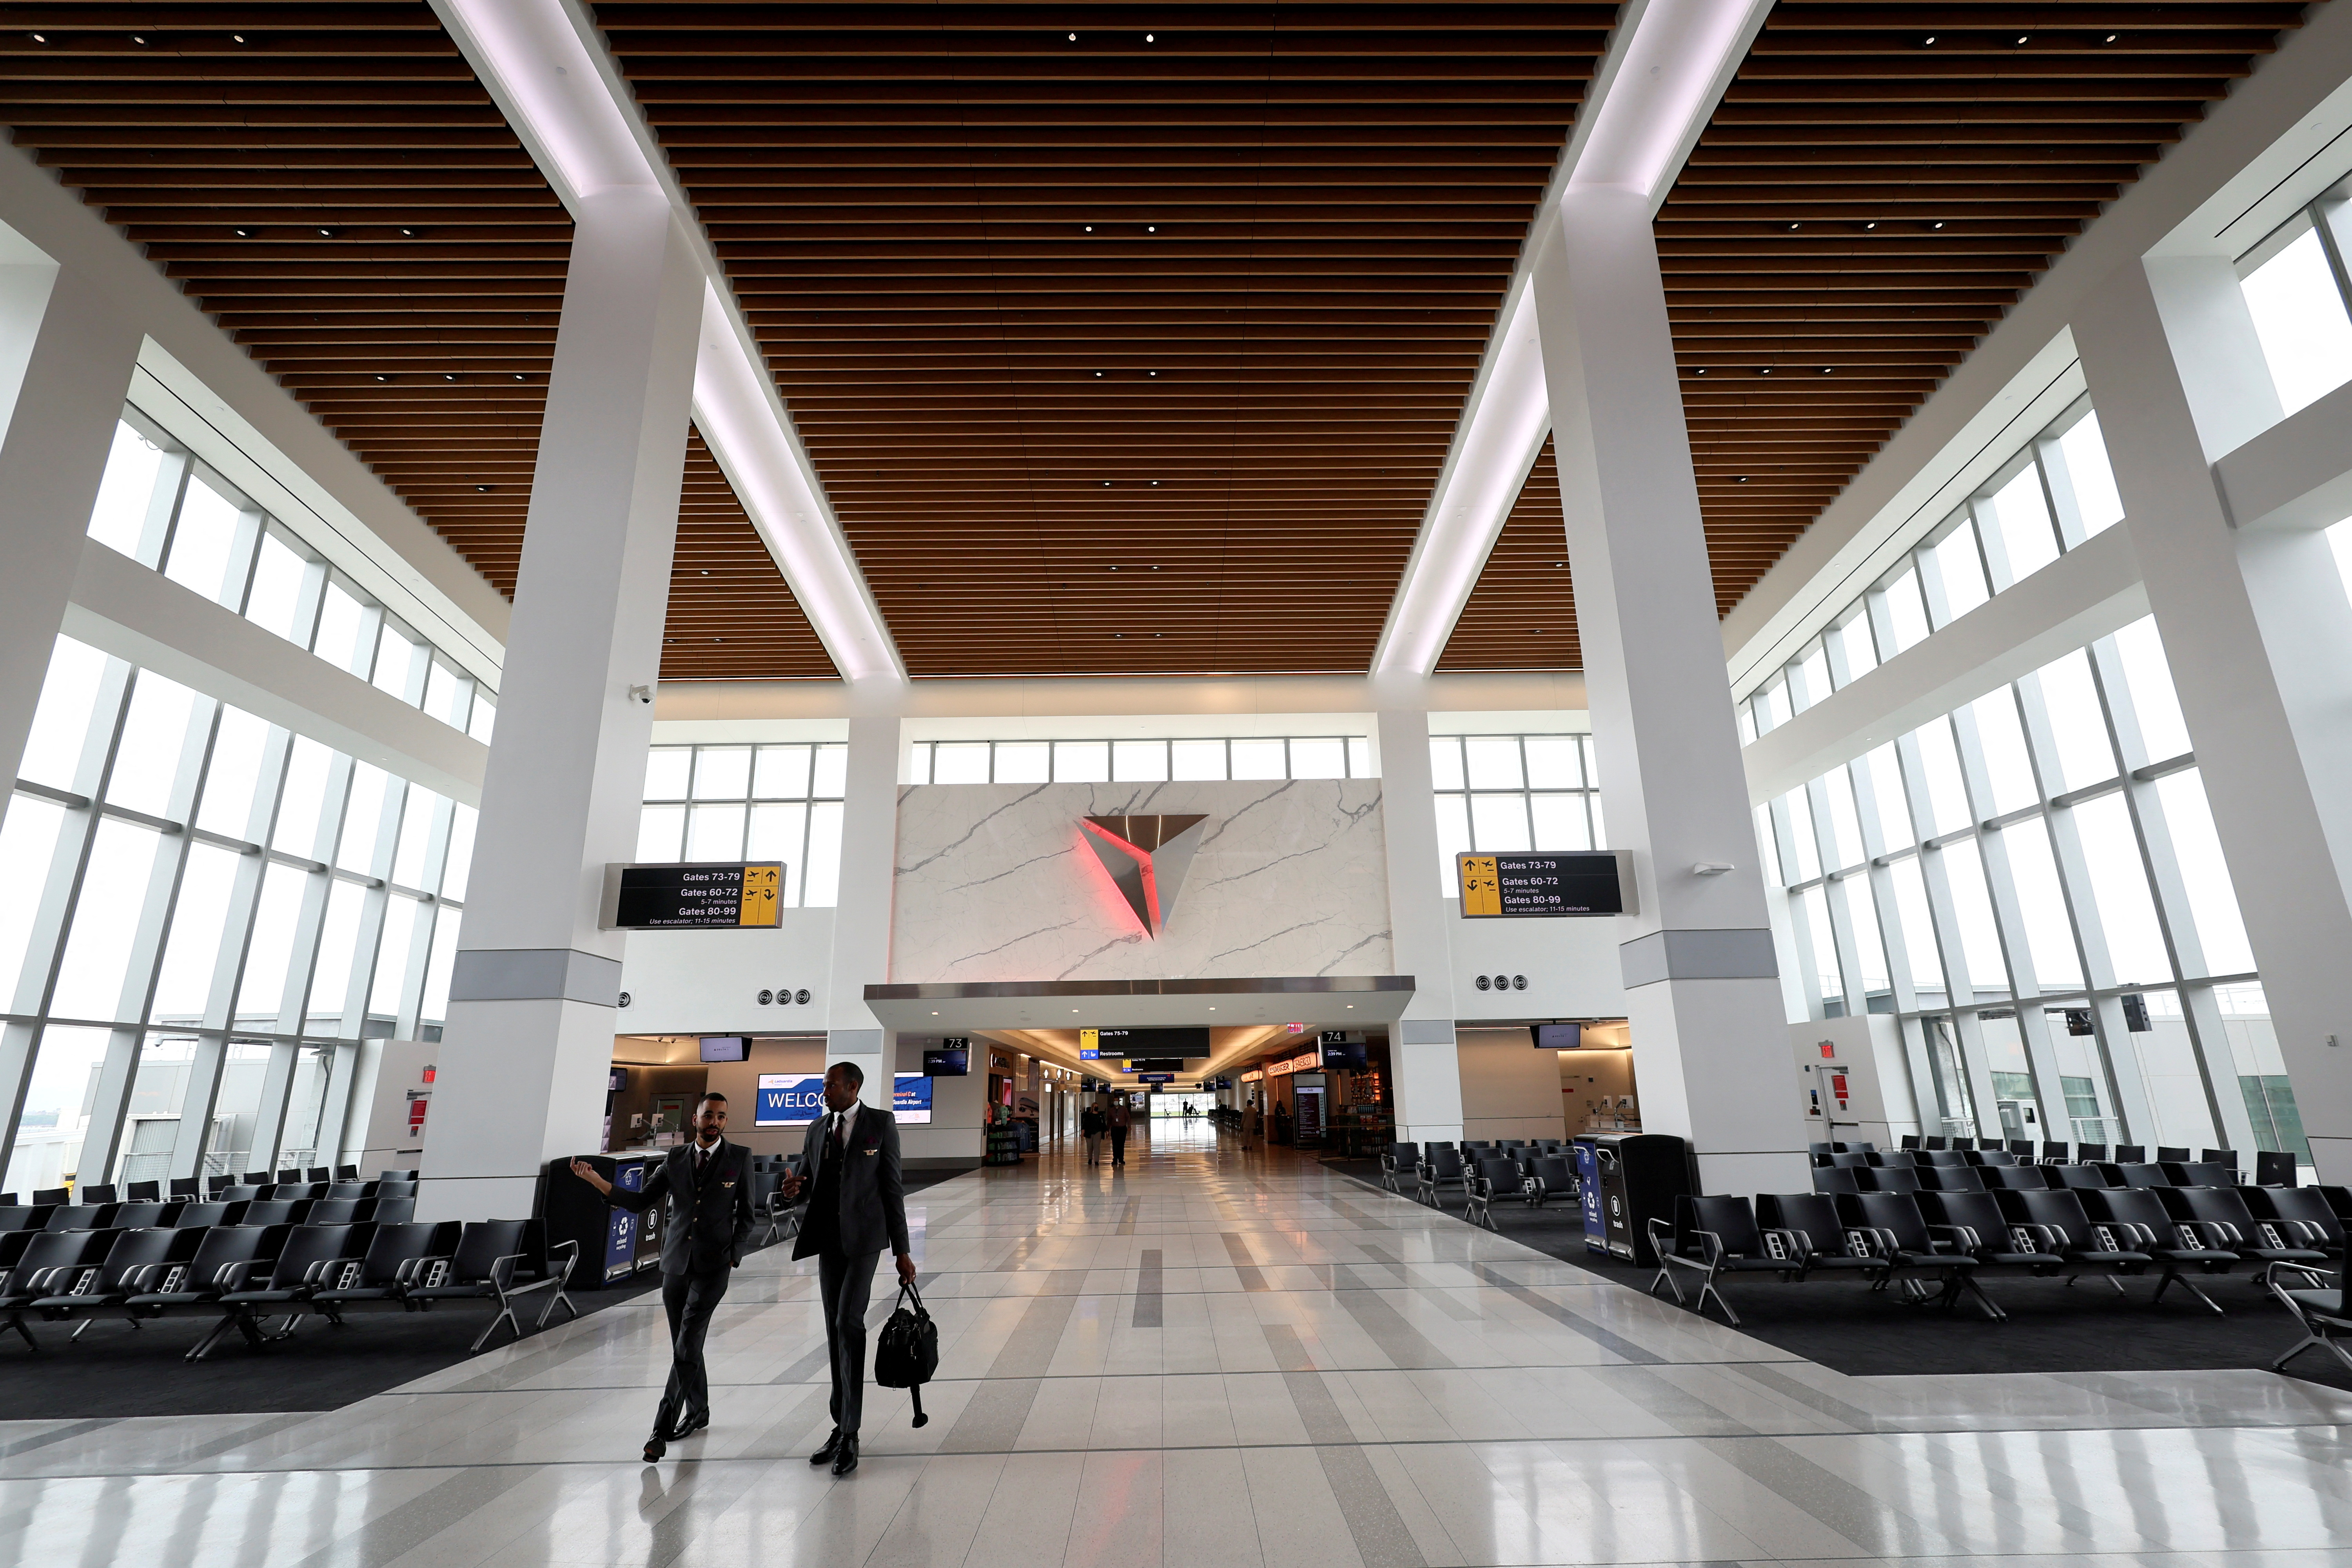 New Delta Airlines Terminal C at LaGuardia Airport is completed in New York